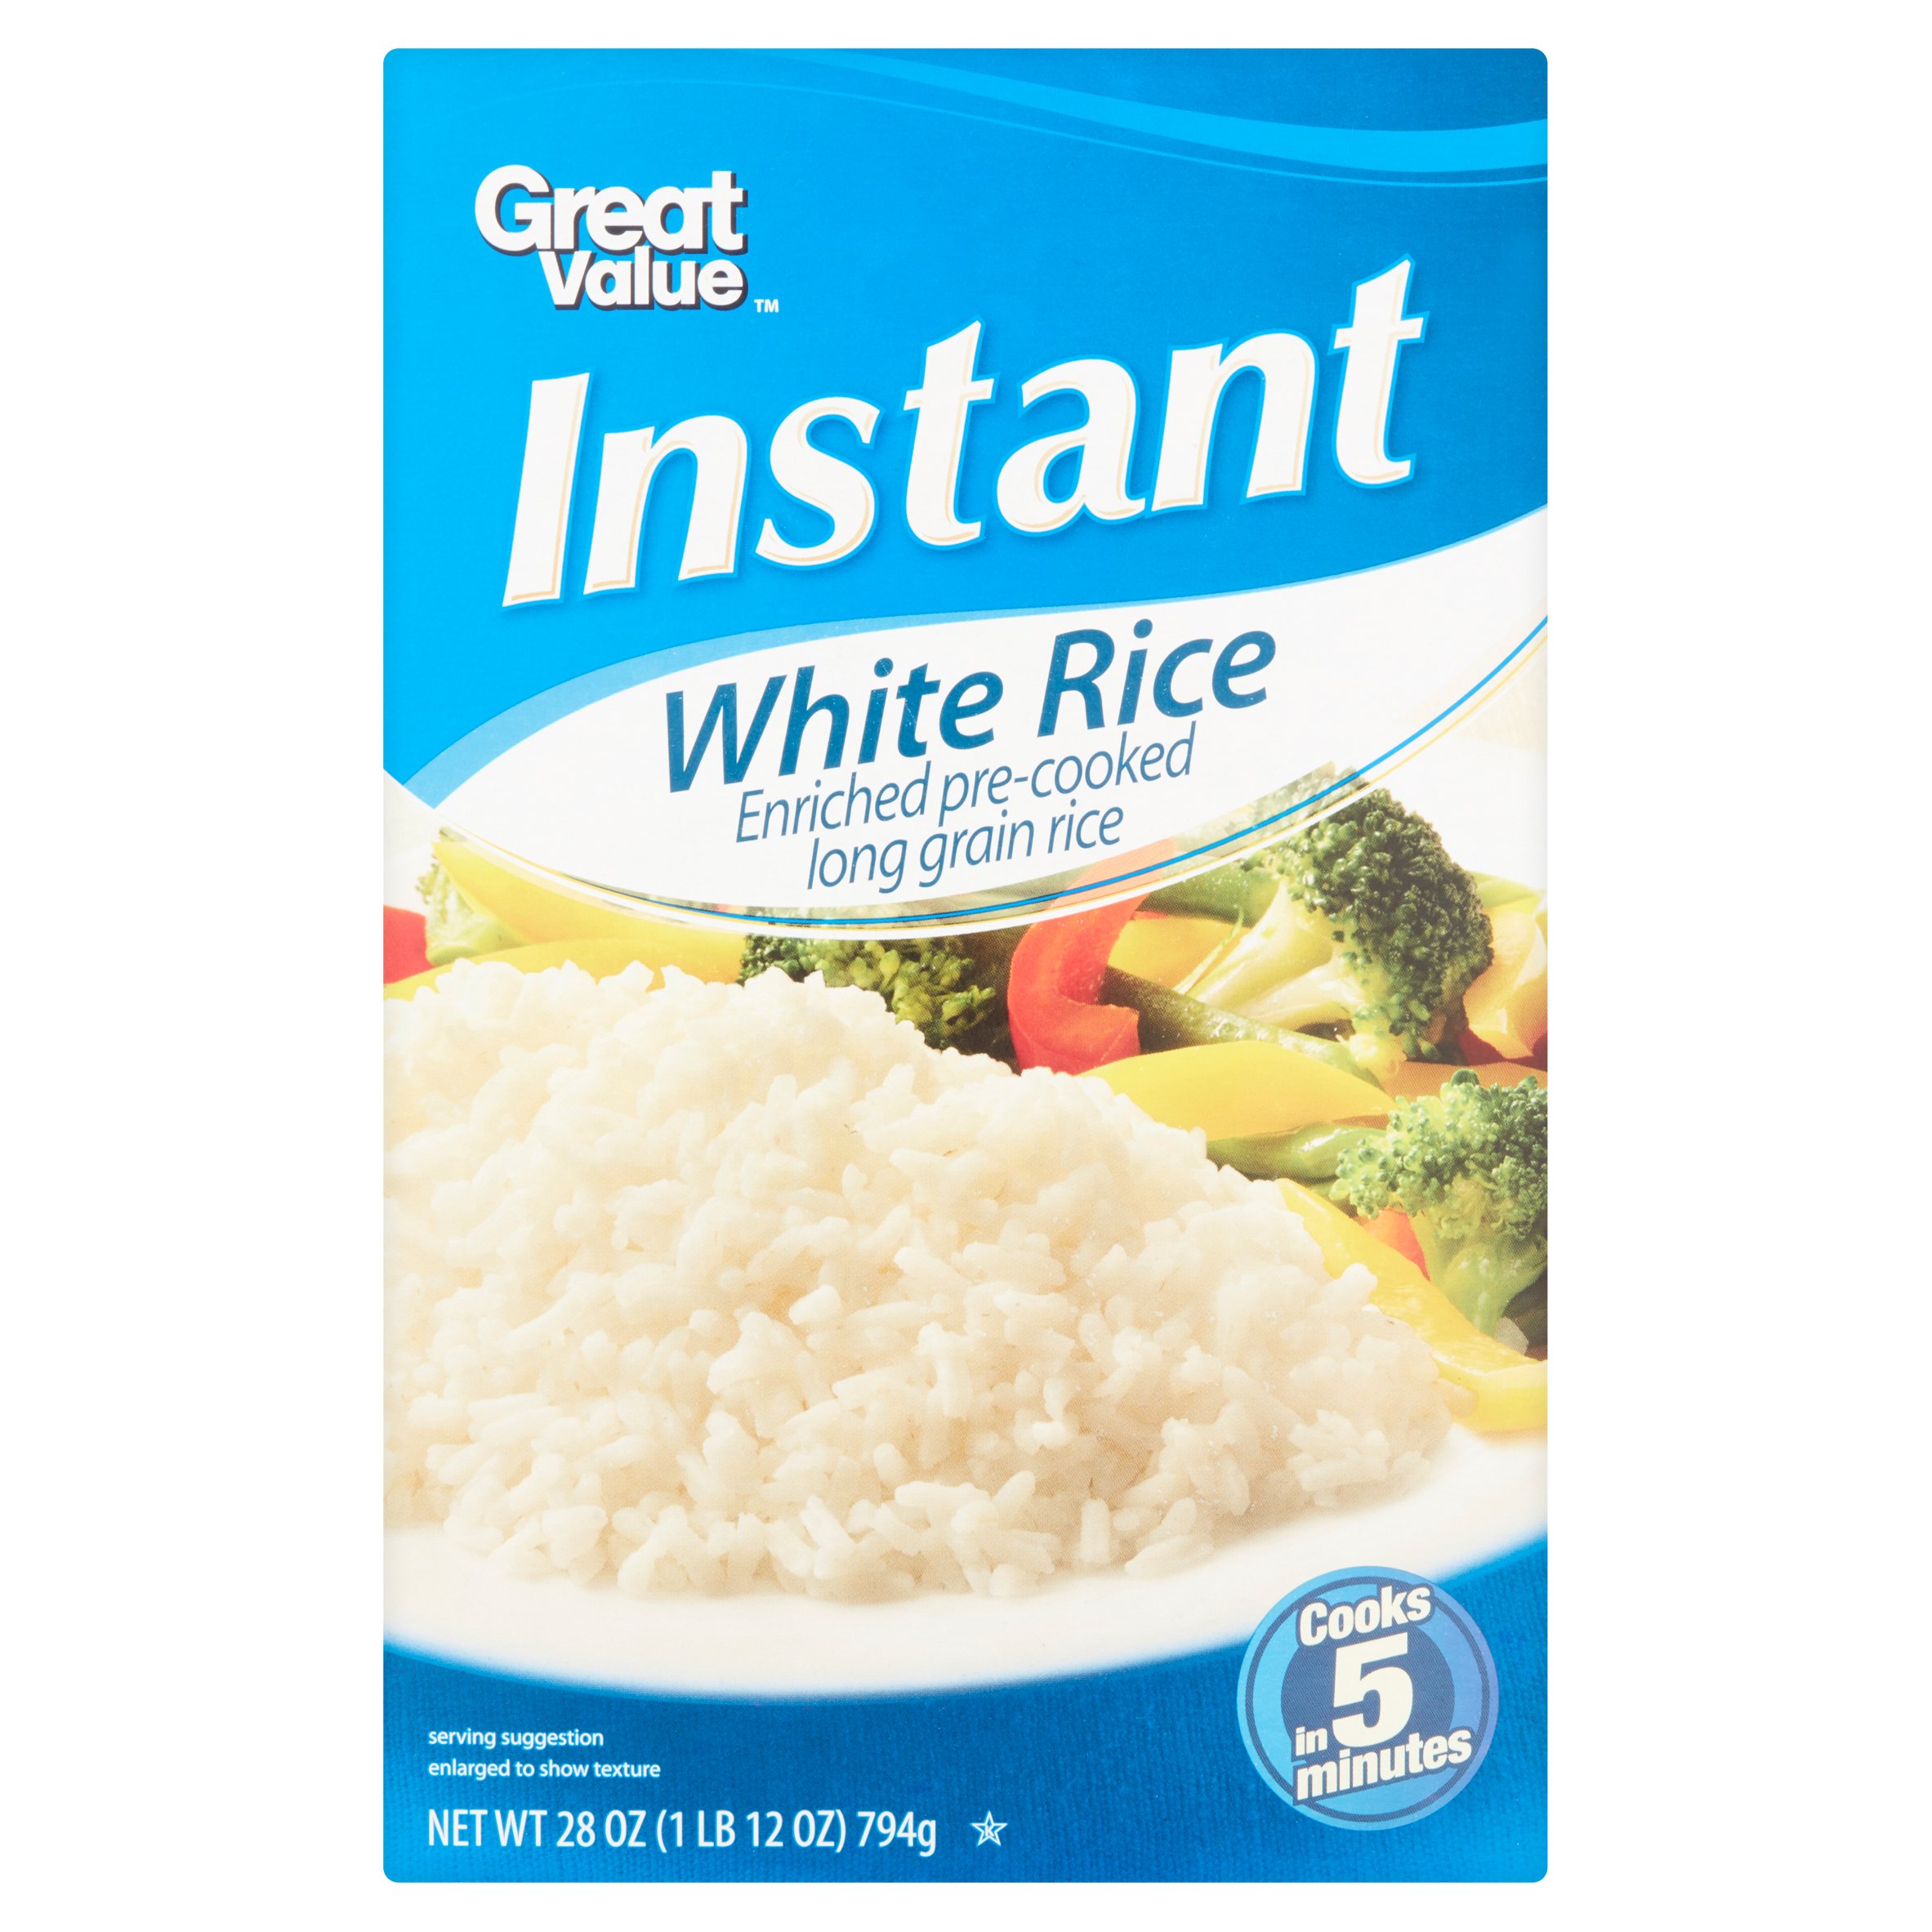 Great Value Instant White Rice